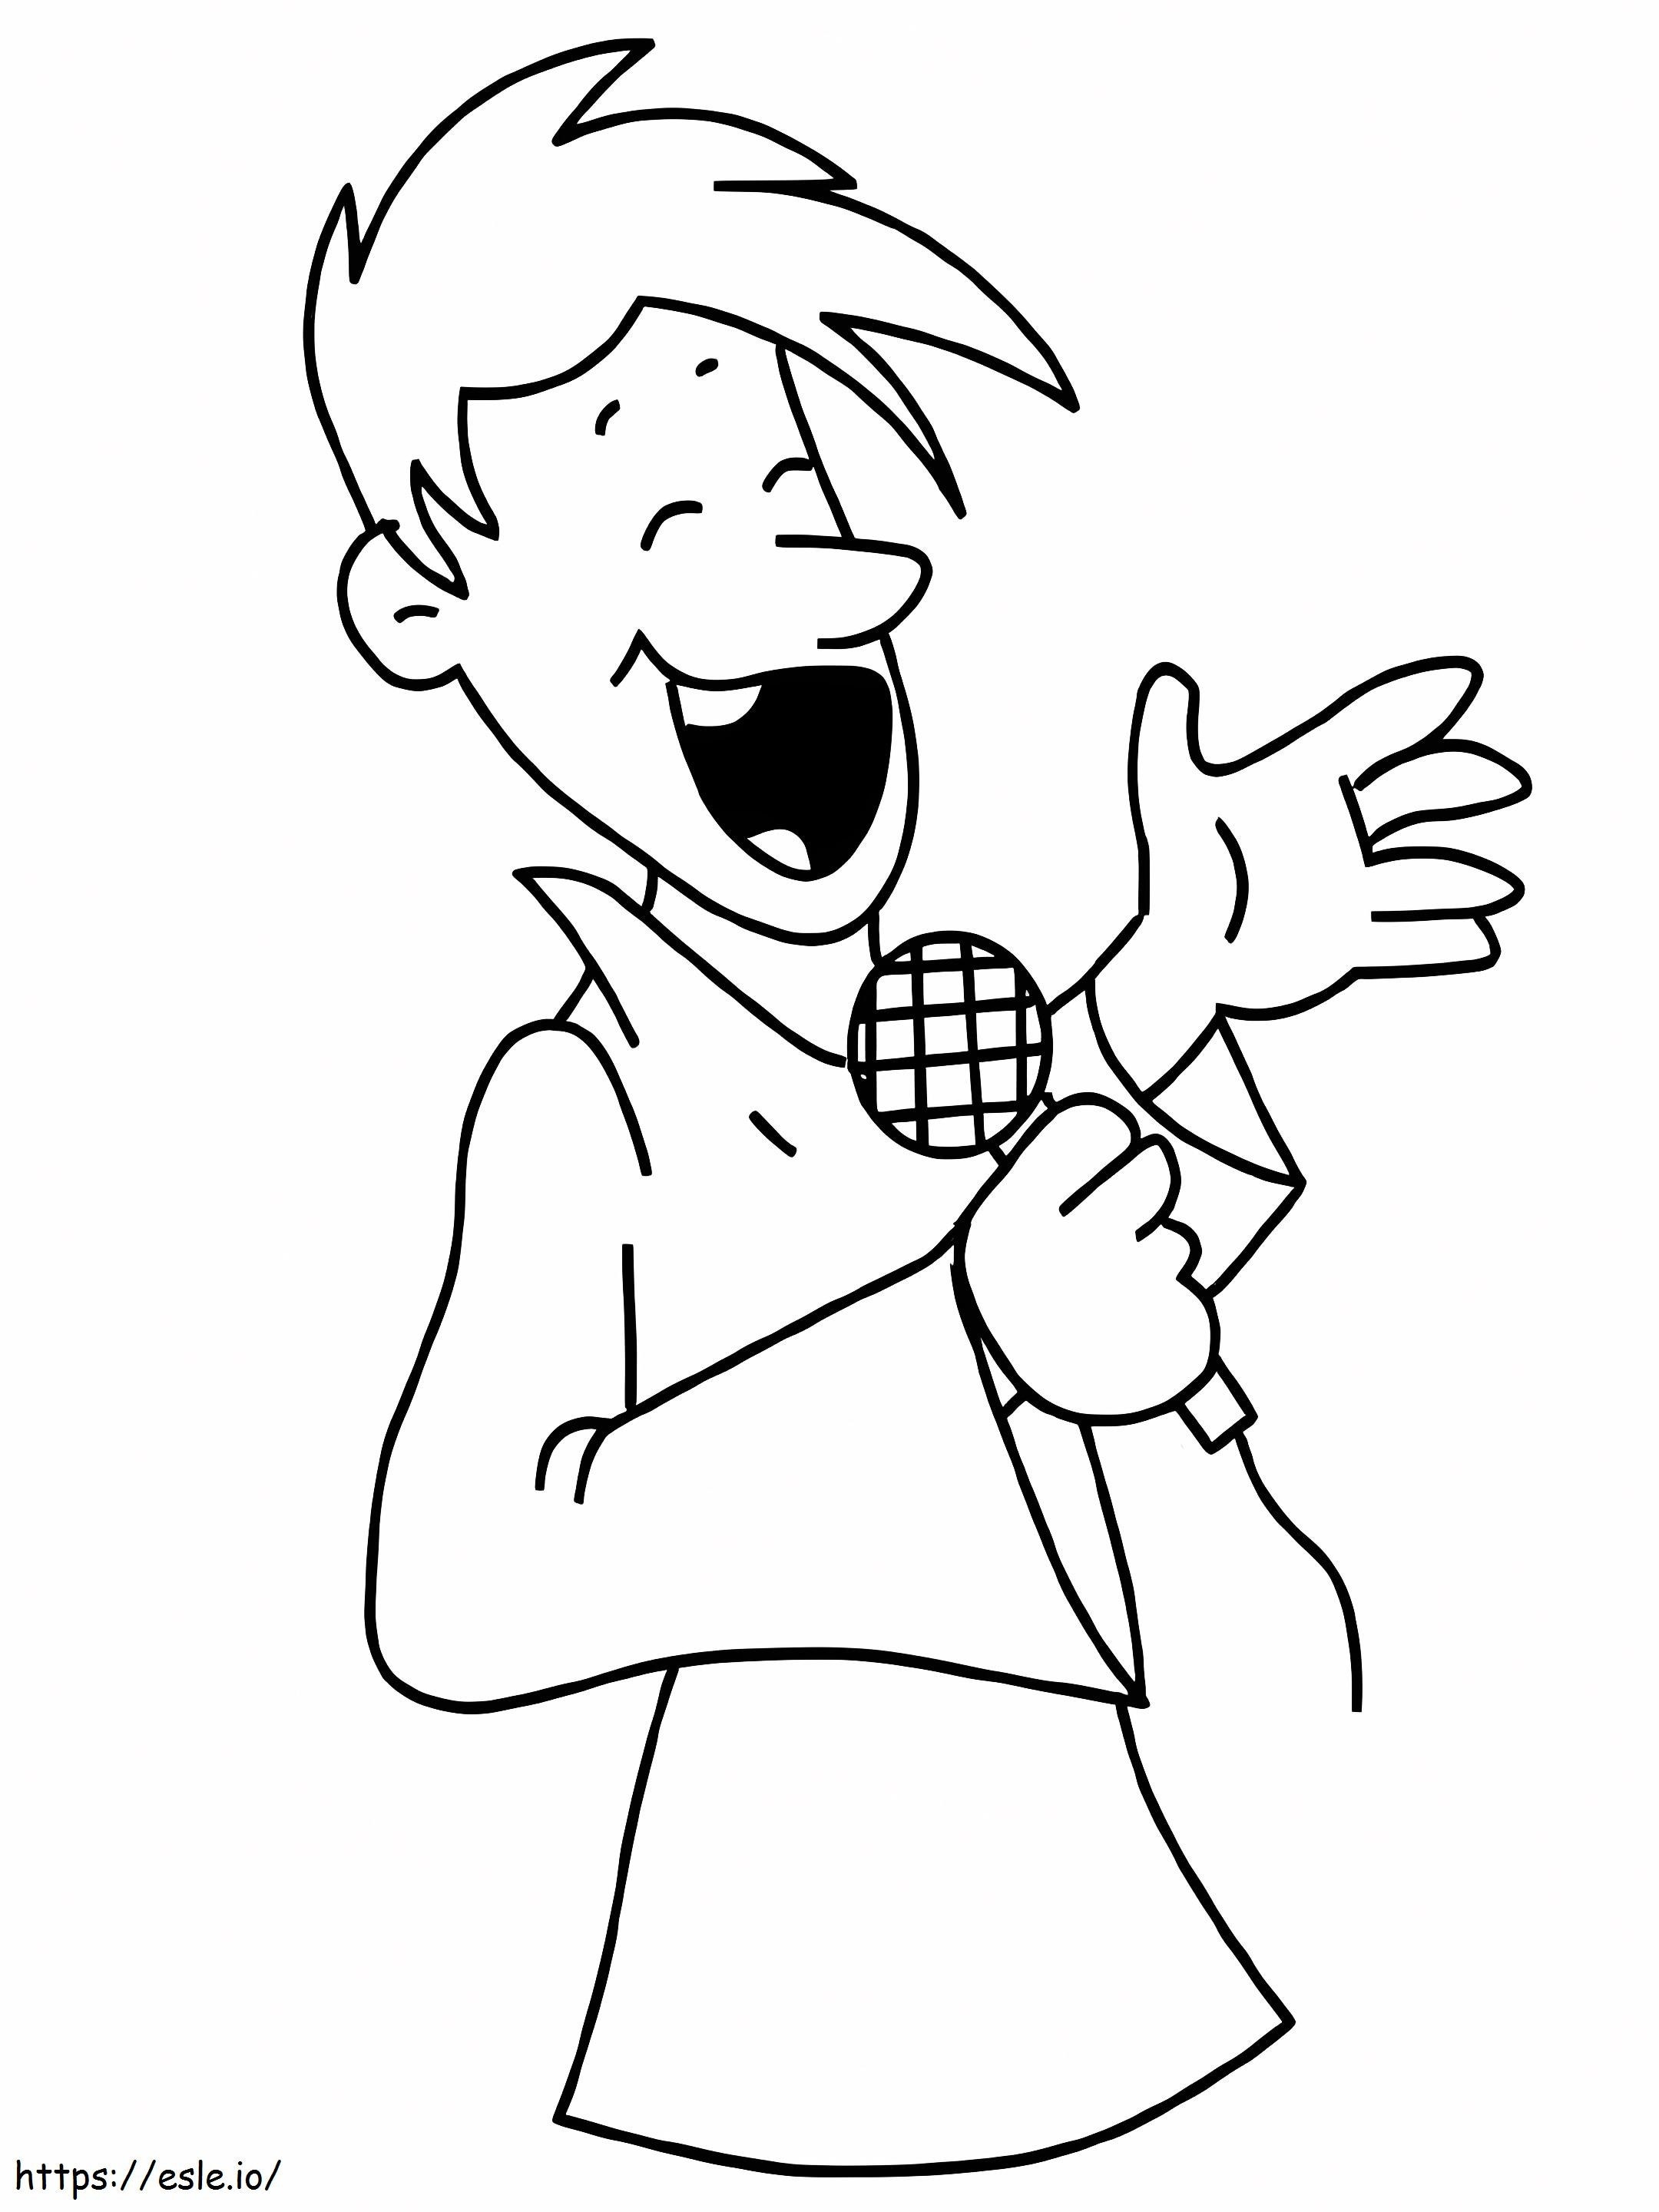 Male Singer coloring page